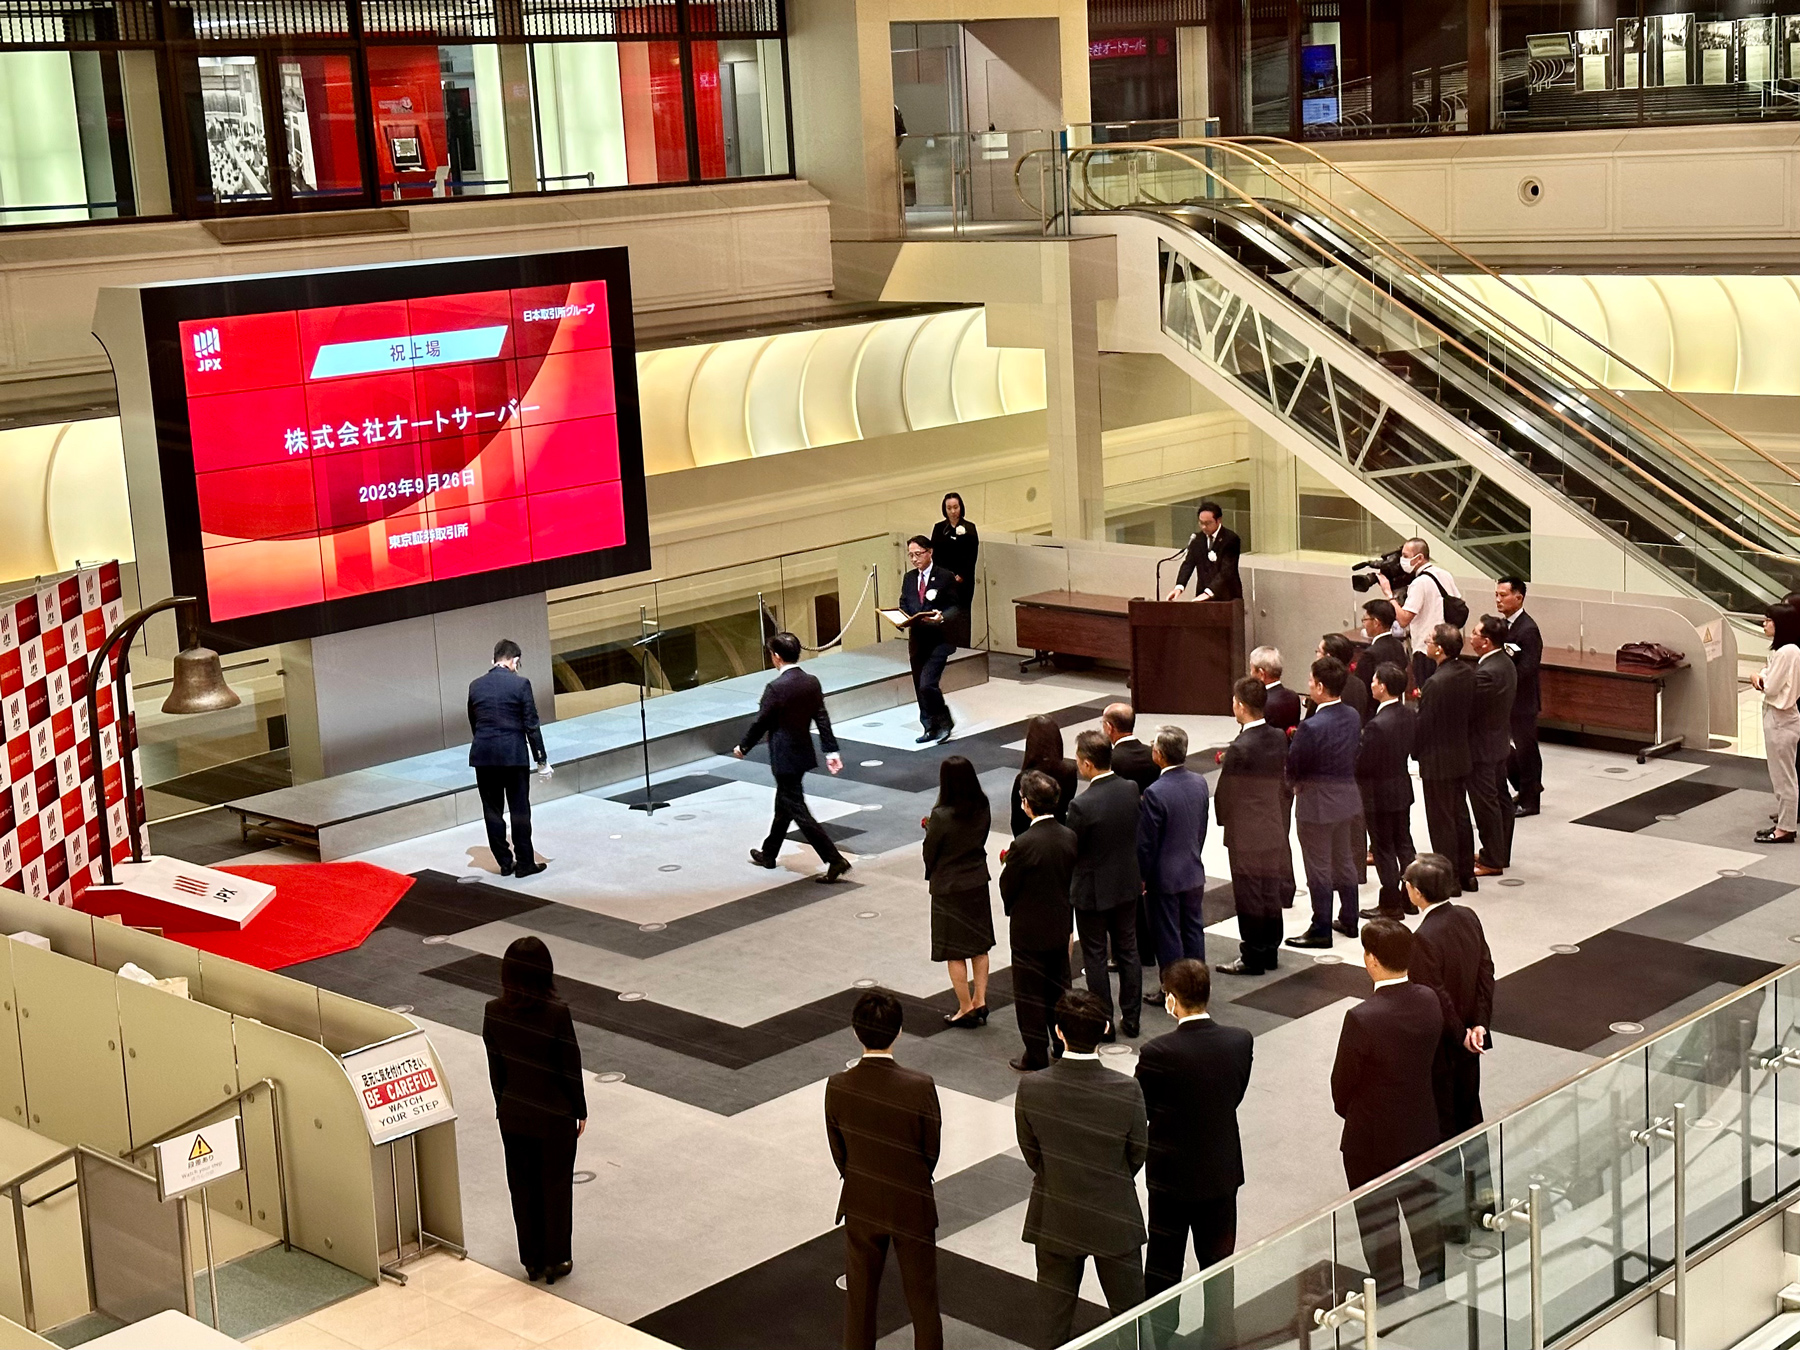 A group of suited people standing in front of the stock exchange screen, their company being added to the stock exchange